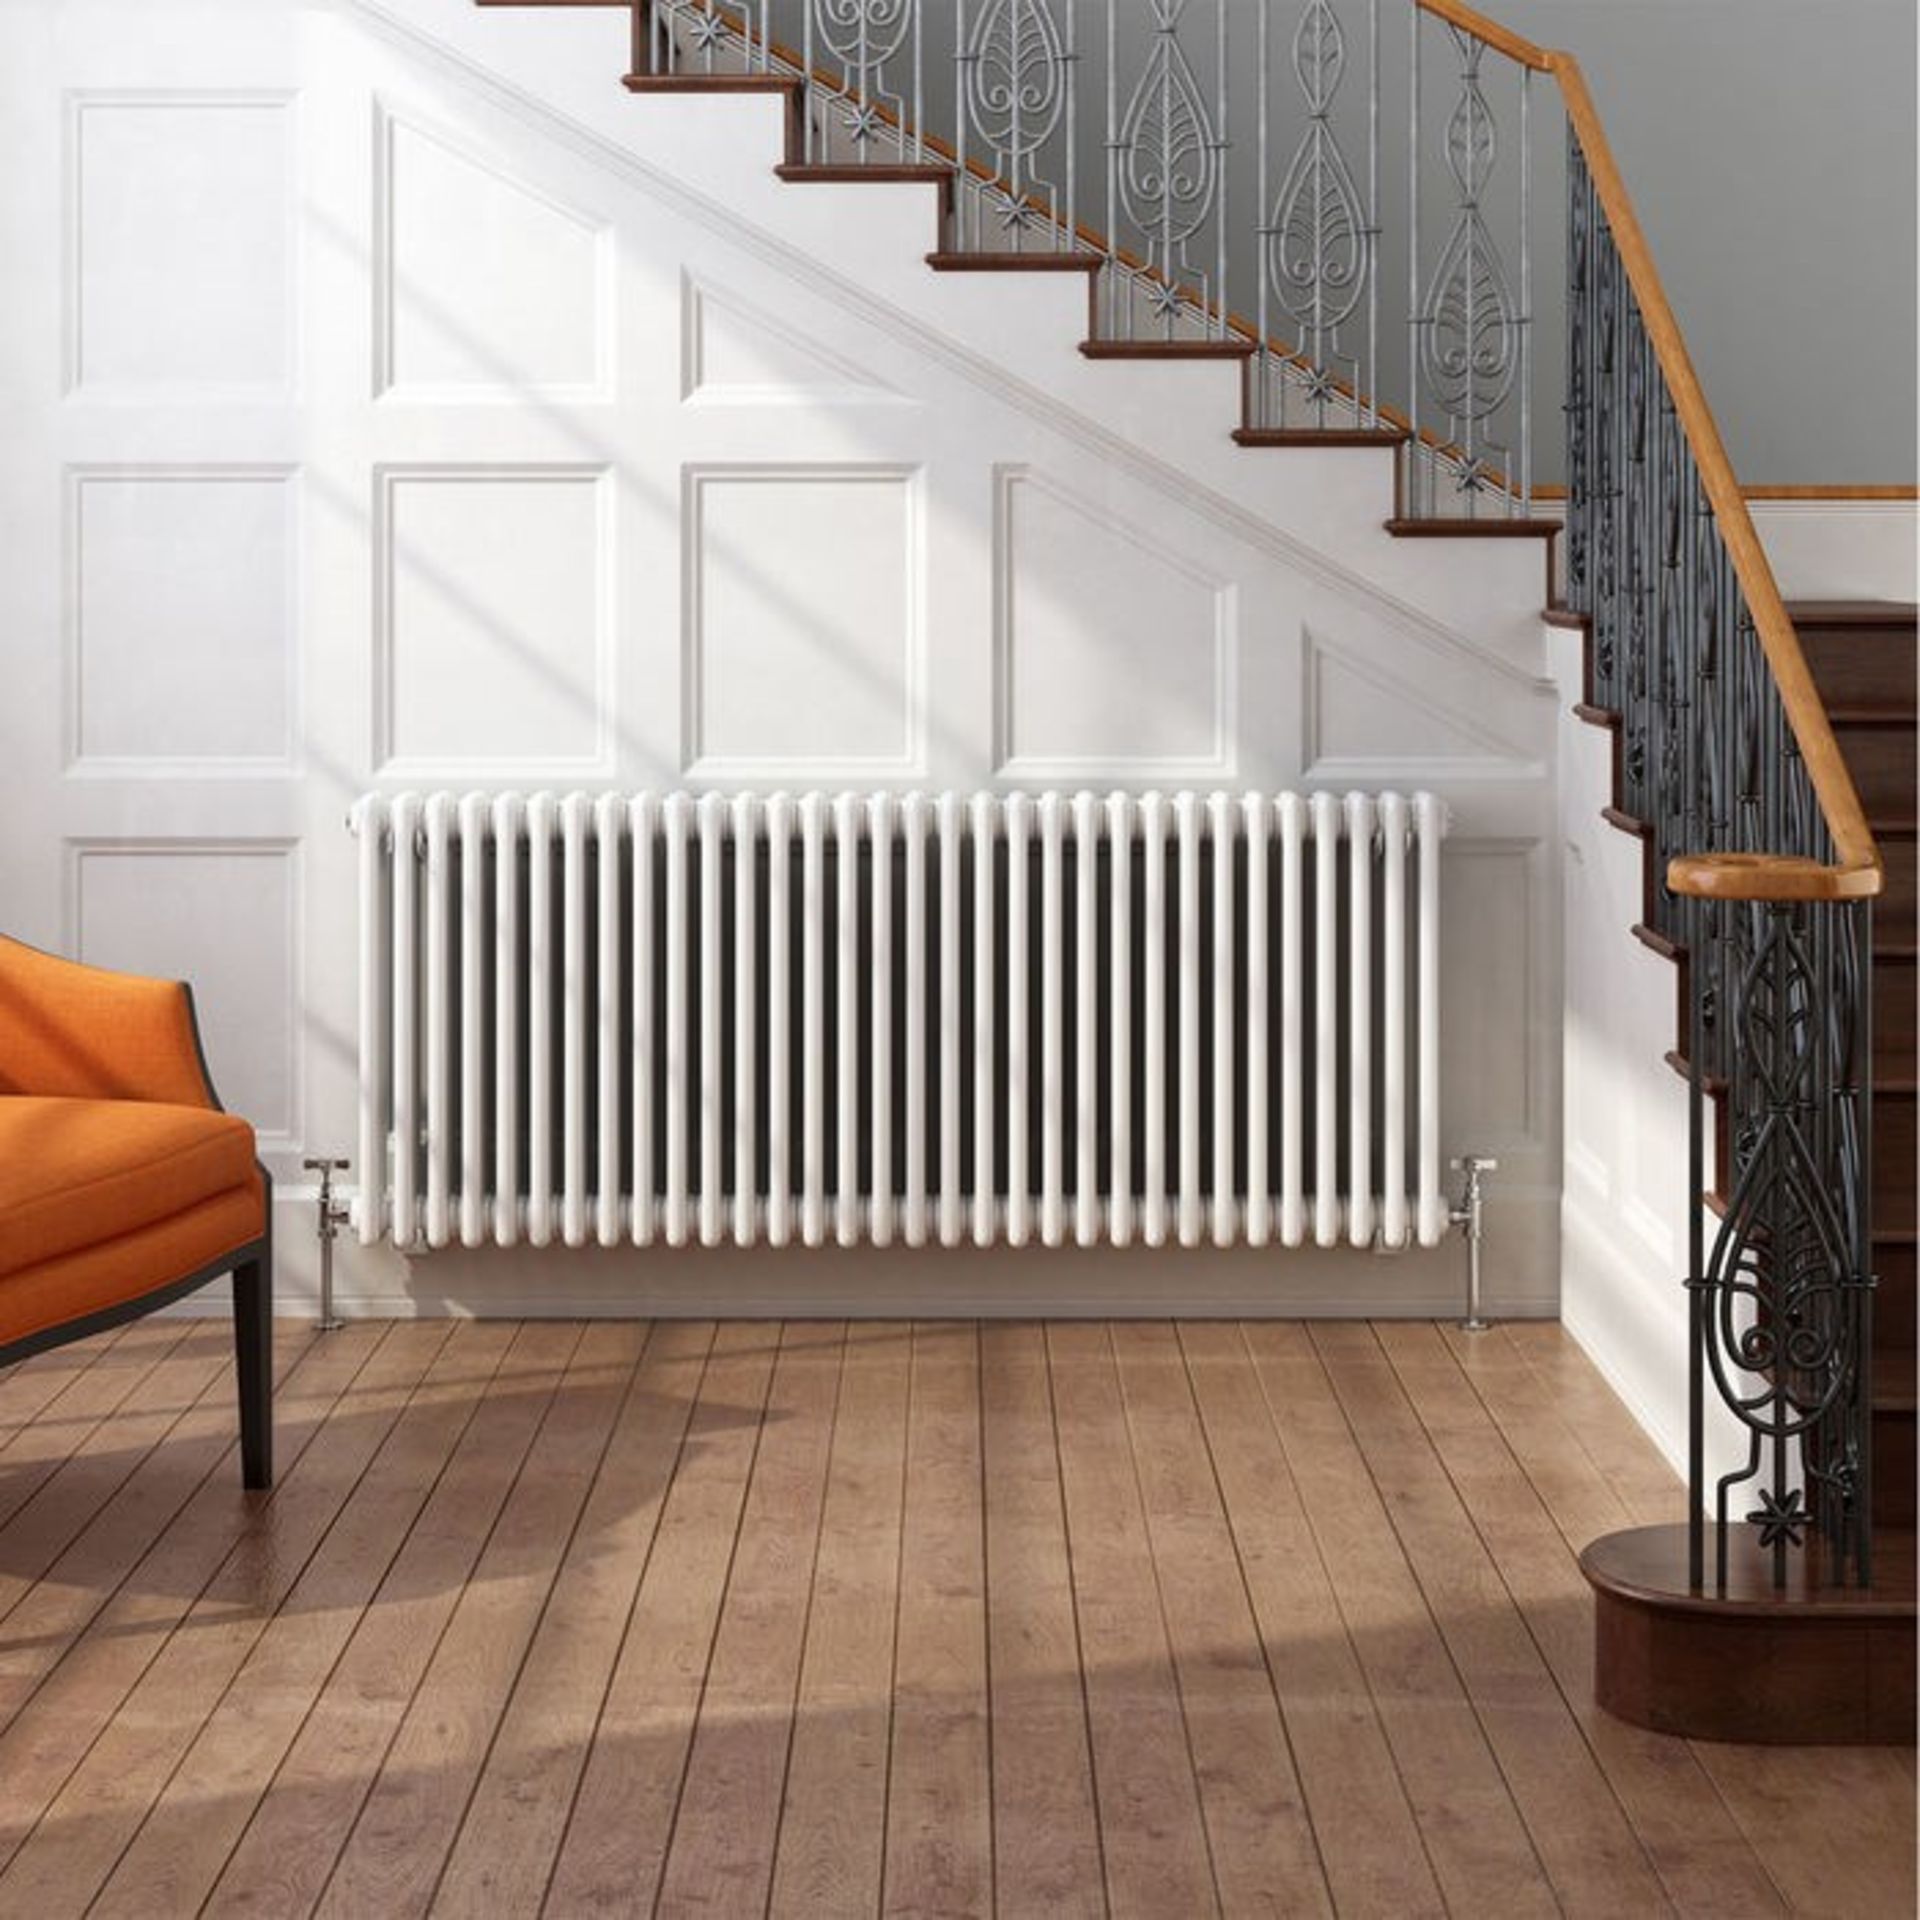 (XL42) 600x1226mm White Double Panel Horizontal Colosseum Traditional Radiator. RRP £552.99.M... - Image 2 of 4